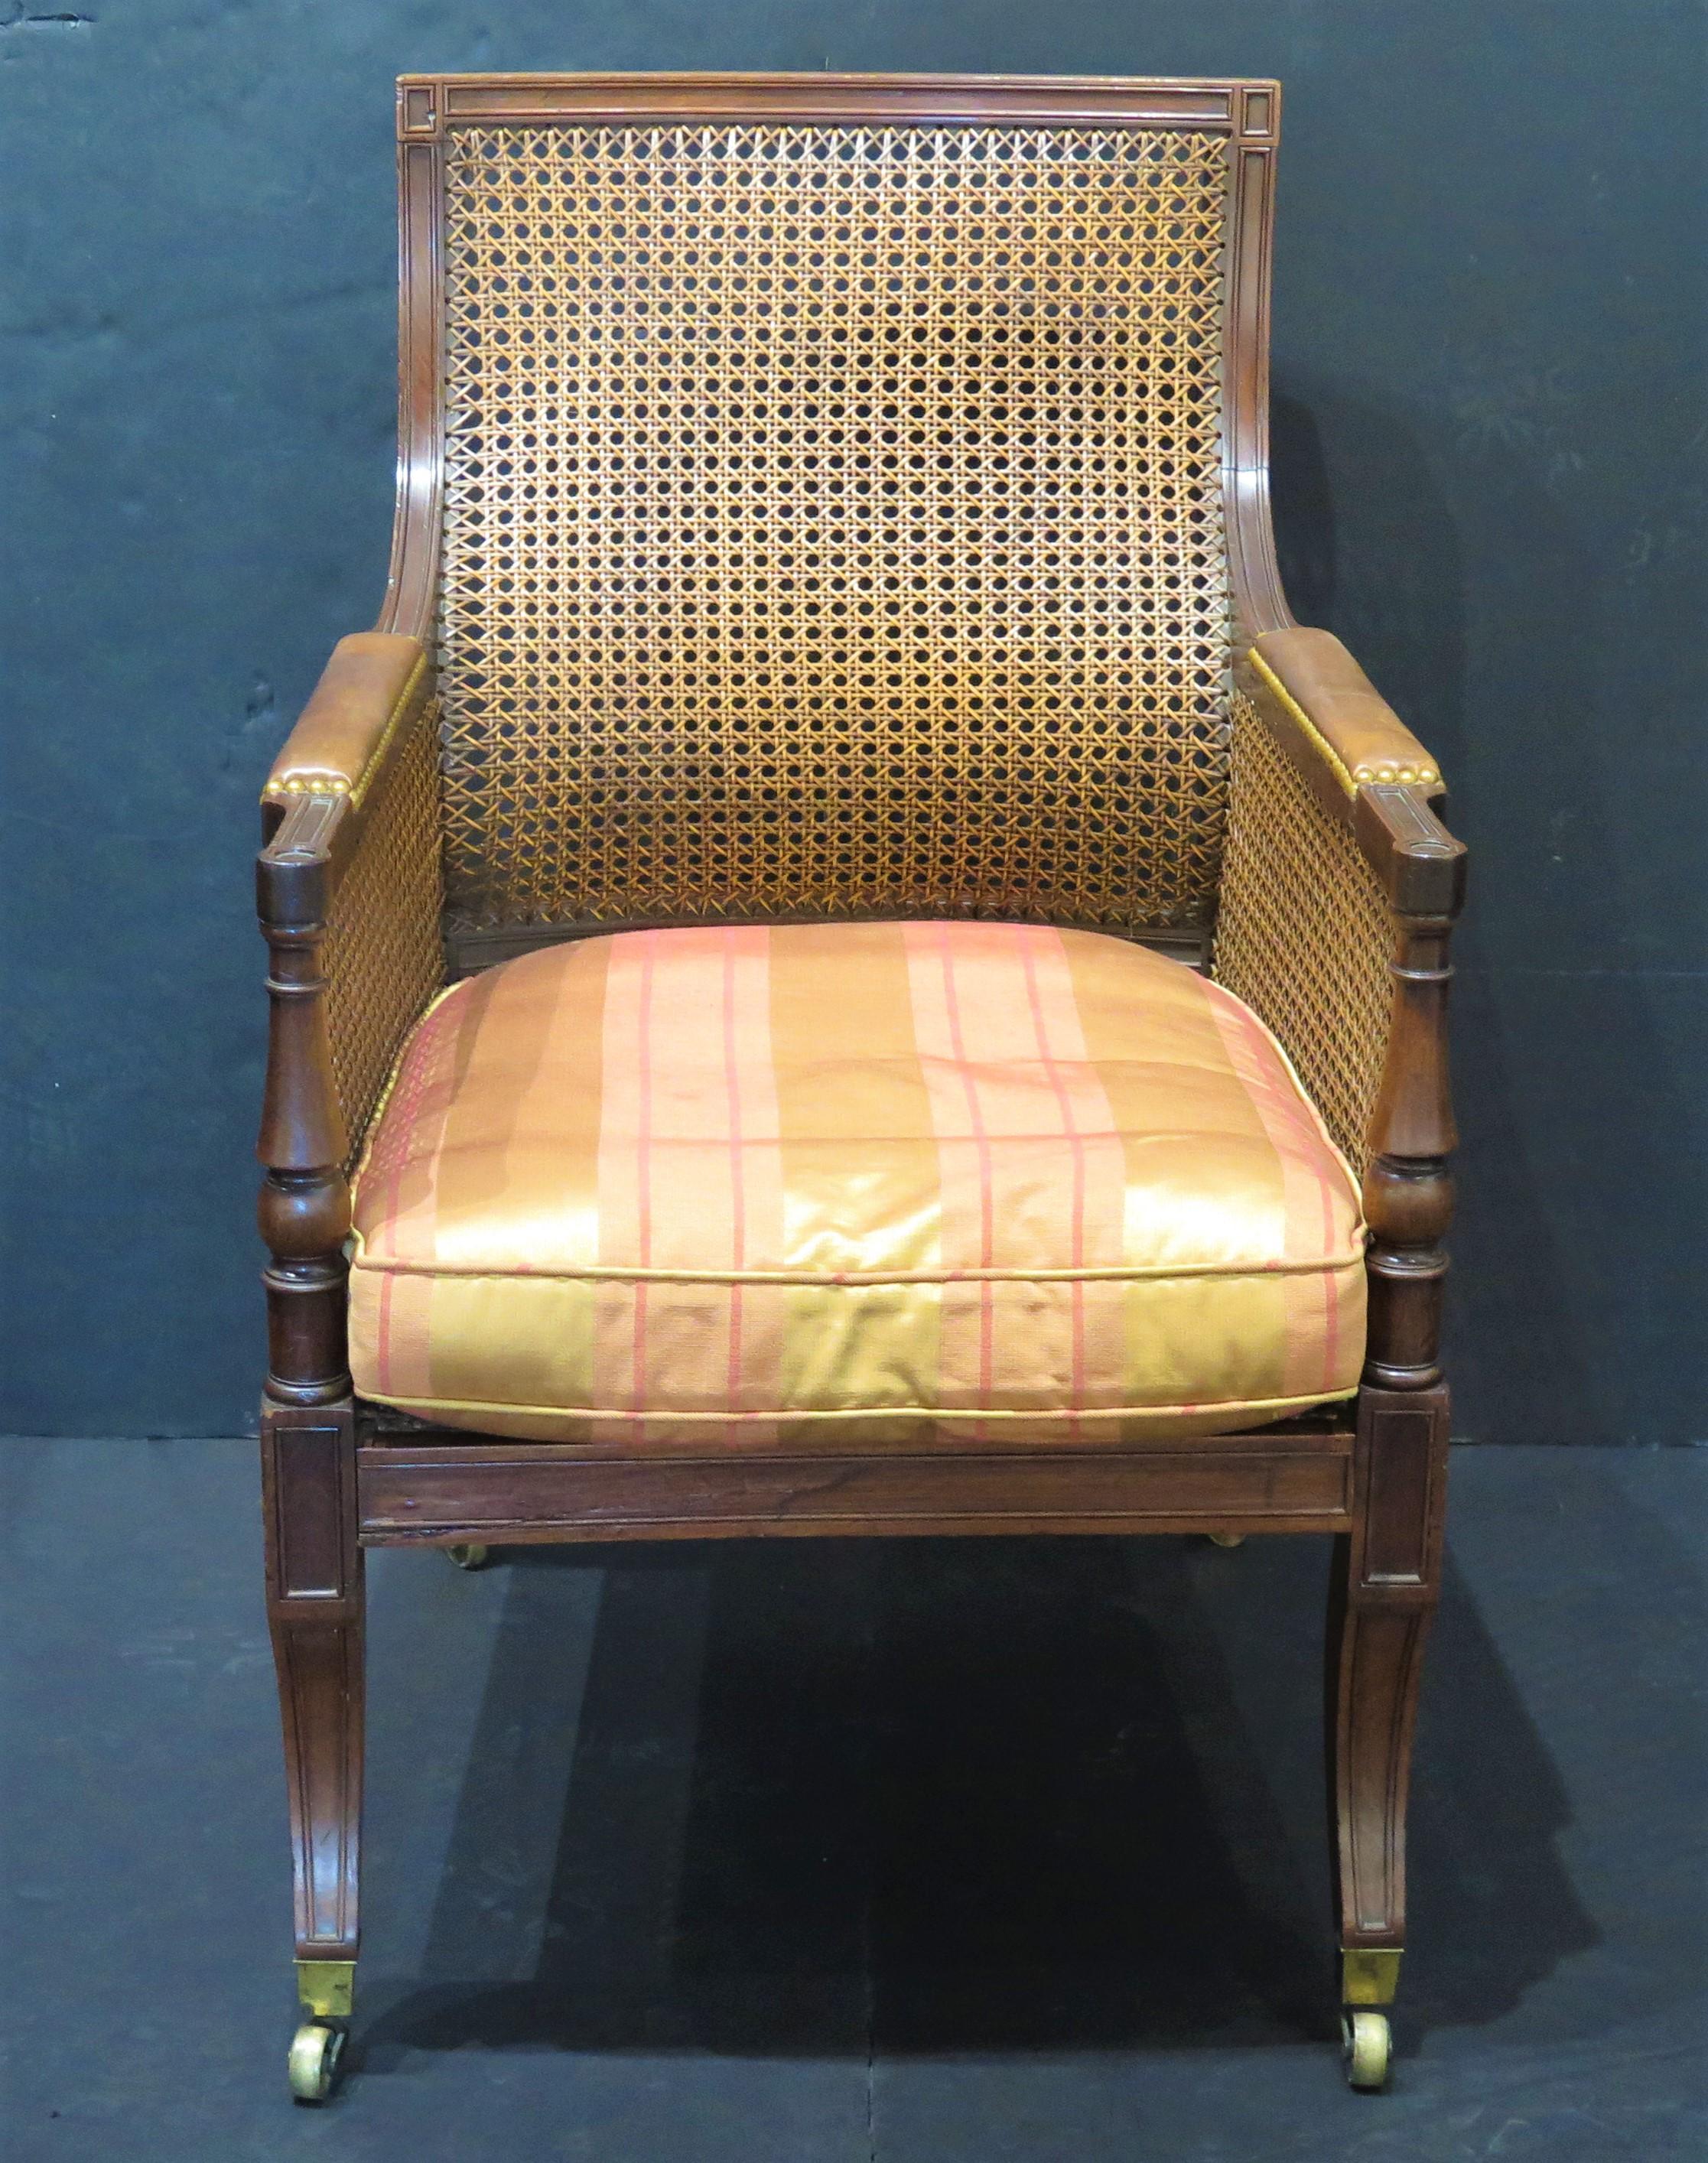 an English Regency caned library chair with loose cushion seat of striped silk, caned seat, back and sides, padded leather arm rests wi9th nailhead trim, sabre legs ending in brass caps with castors, England, mid-19th century